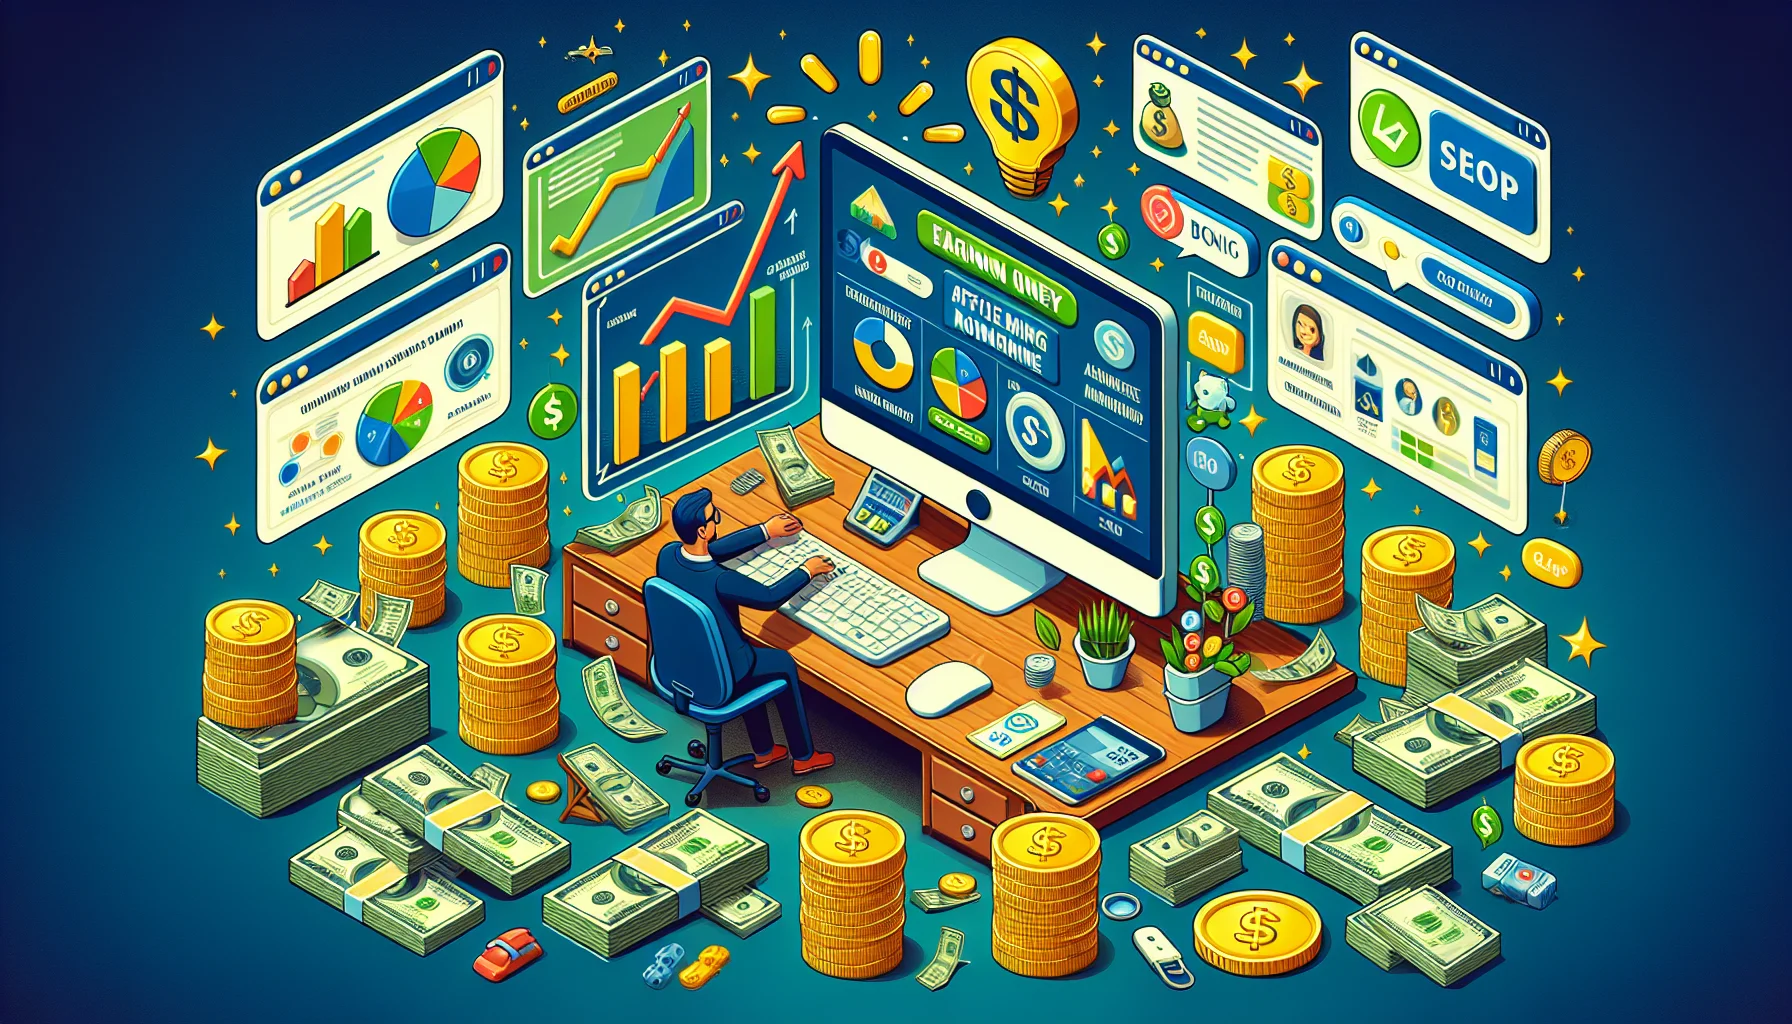 Create a humorous realistic image that illustrates the review of an unnamed online affiliate marketing program. Depict it in an appealing setup related to earning money online. Include an engaging narrative with key elements such as a computer screen showing positive customer reviews, a growing graph symbolizing increasing profit margin, and piles of virtual coins or dollar bills to suggest earning potential. Surround the scene with a range of online marketing materials like an SEO diagram, banner ads layout, and affiliate link symbol for a complete picture of the program. Please remember to ensure this scene is light-hearted and comedic in tone.